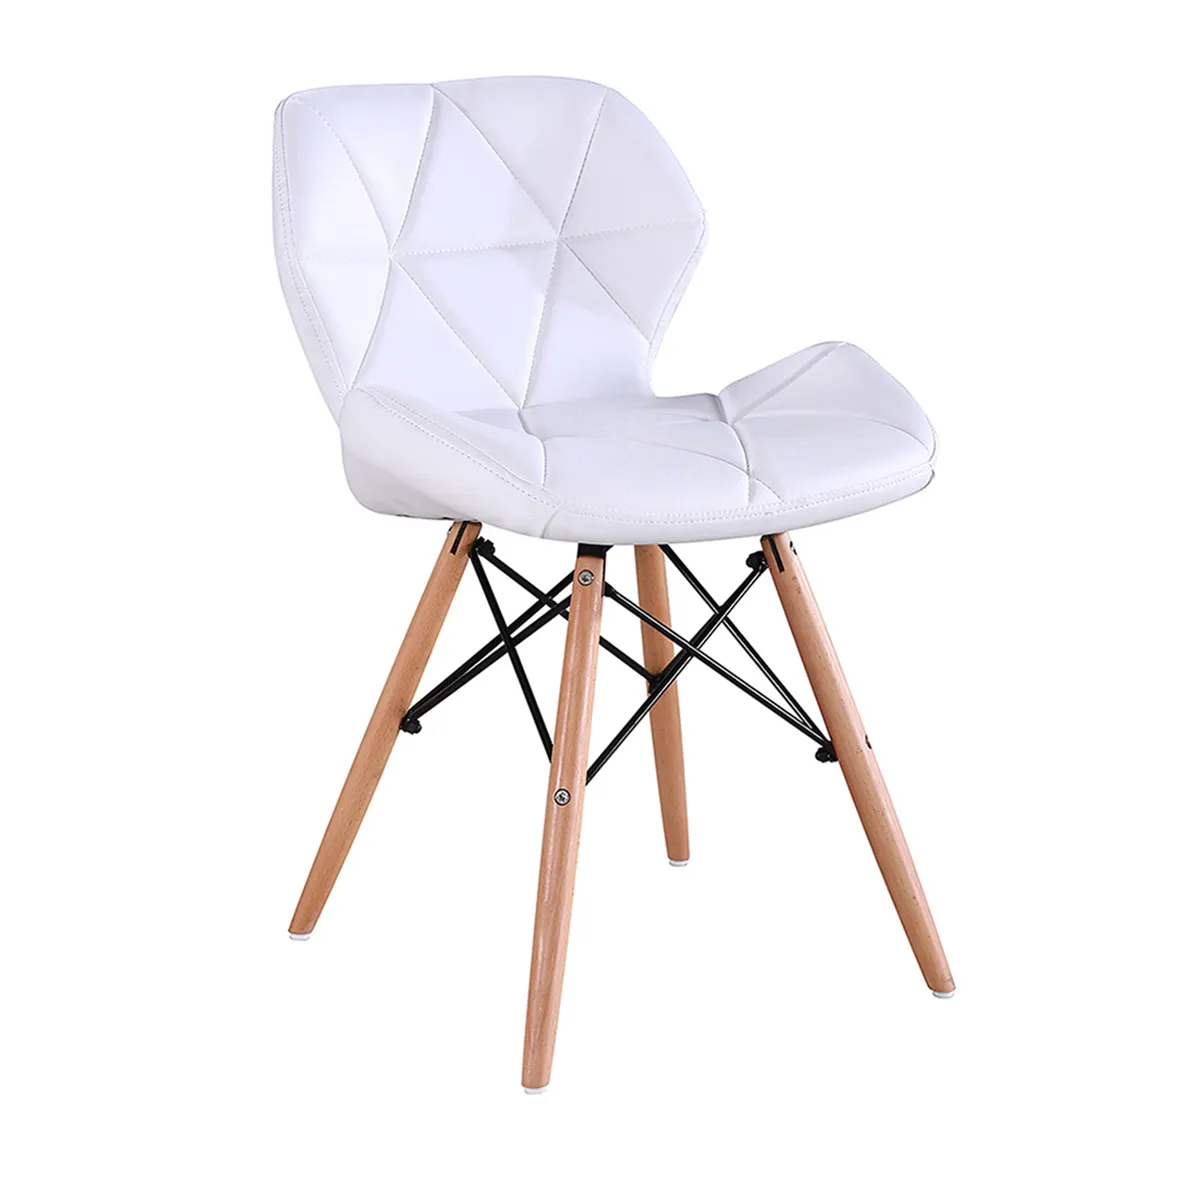 High Quality Cheap PU Leather Cover Wooden Legs Barber Dinning Dining Room Chair Wholesale, HYL-046